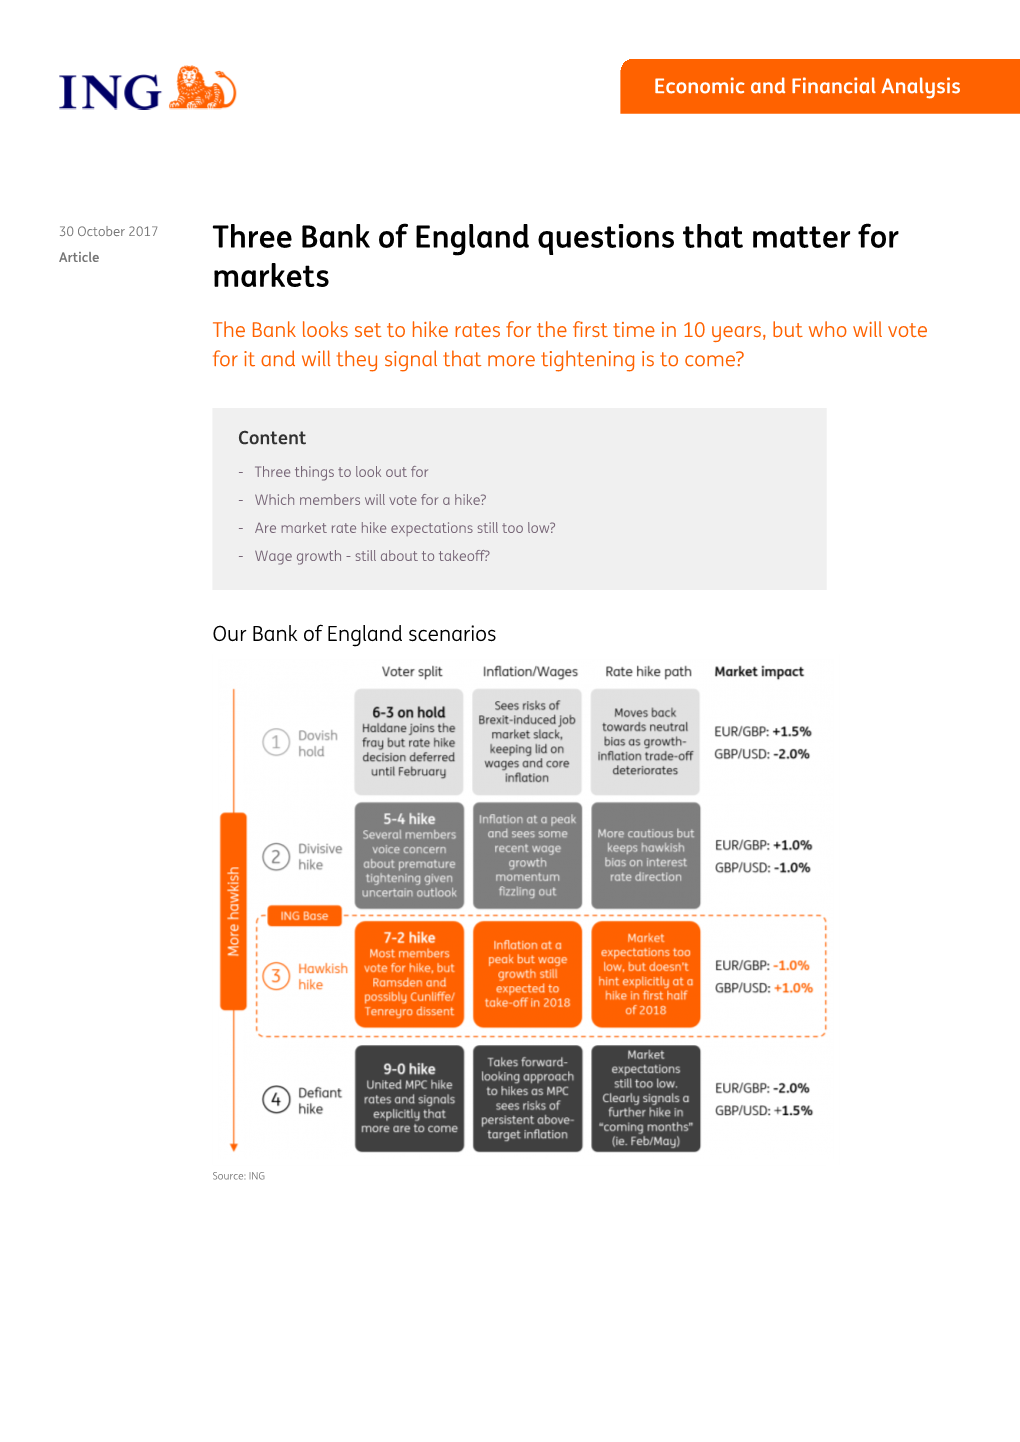 Three Bank of England Questions That Matter for Markets